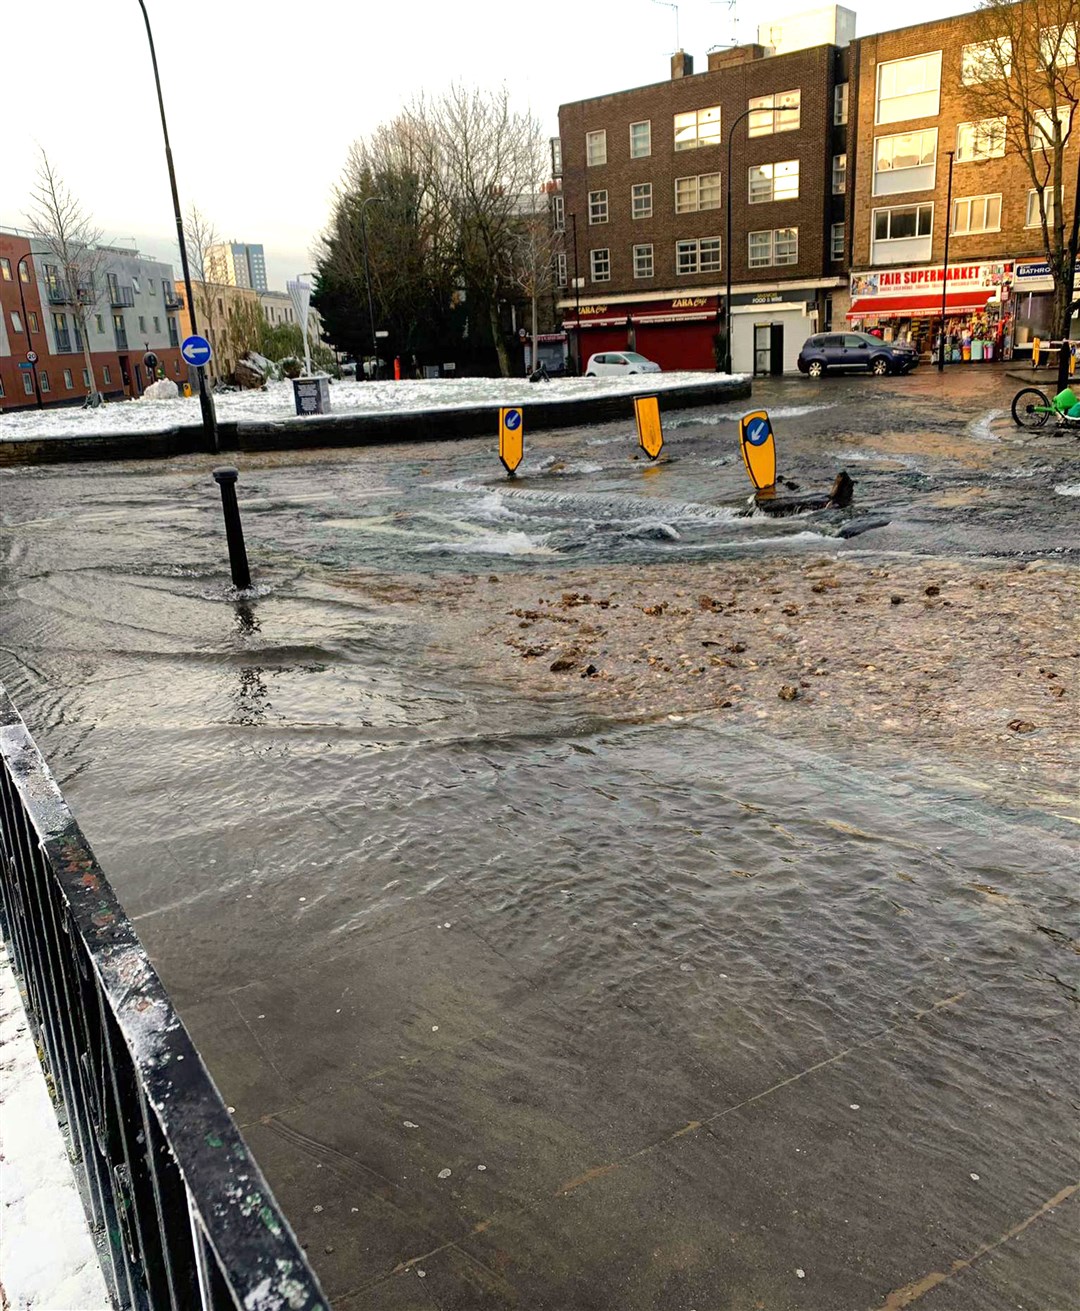 One resident described her street like ‘the River Thames’ (@co_dolcy/Twitter)